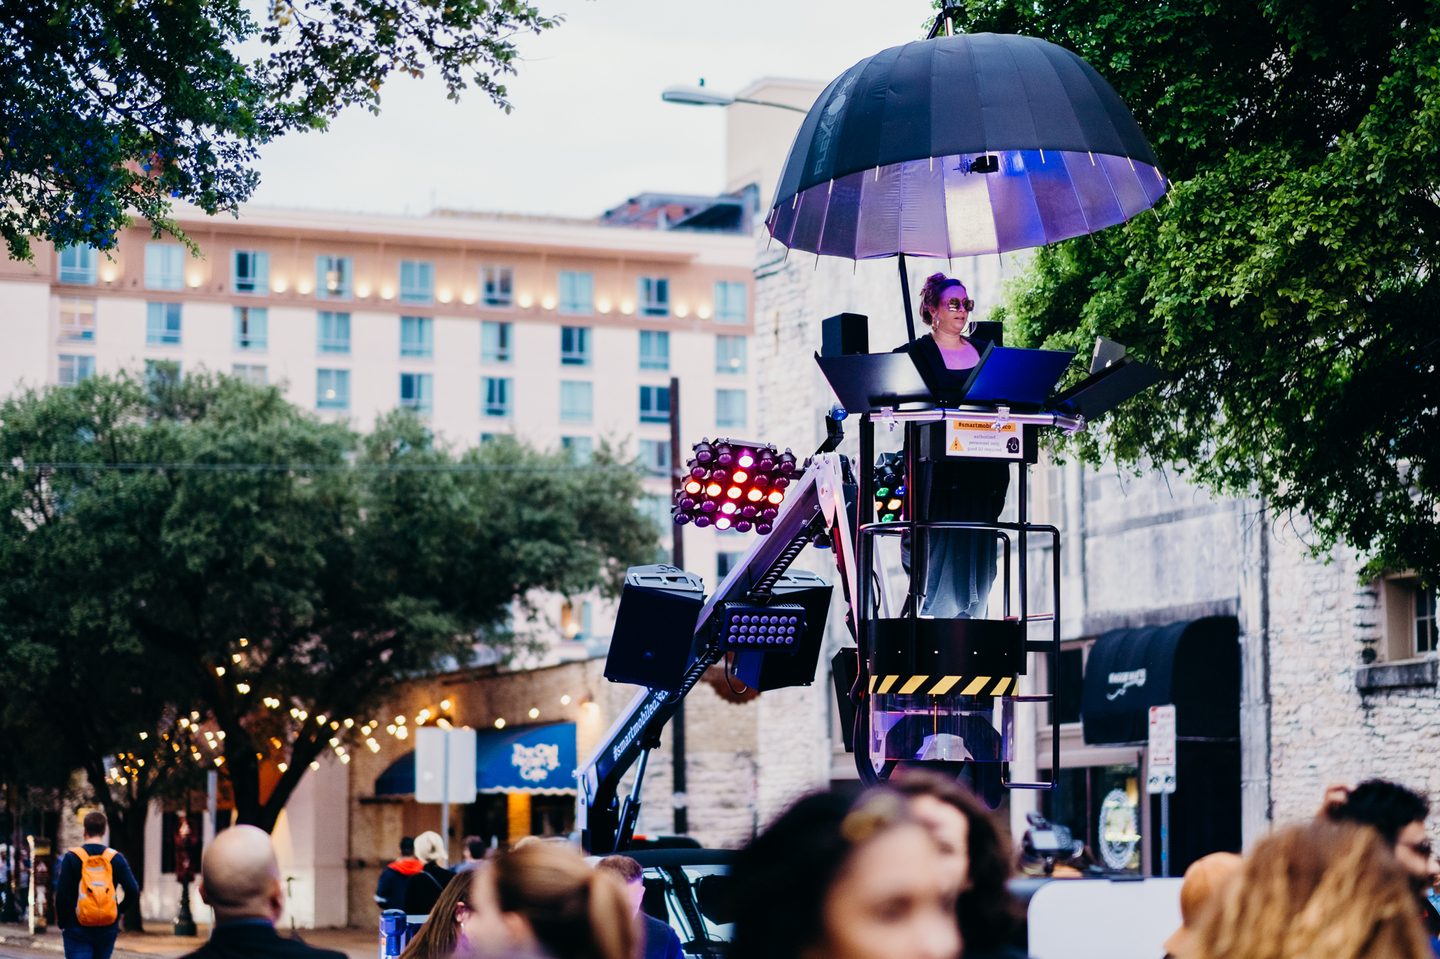 smart mobile disco features DJs at 6th and Trintiy Streets.